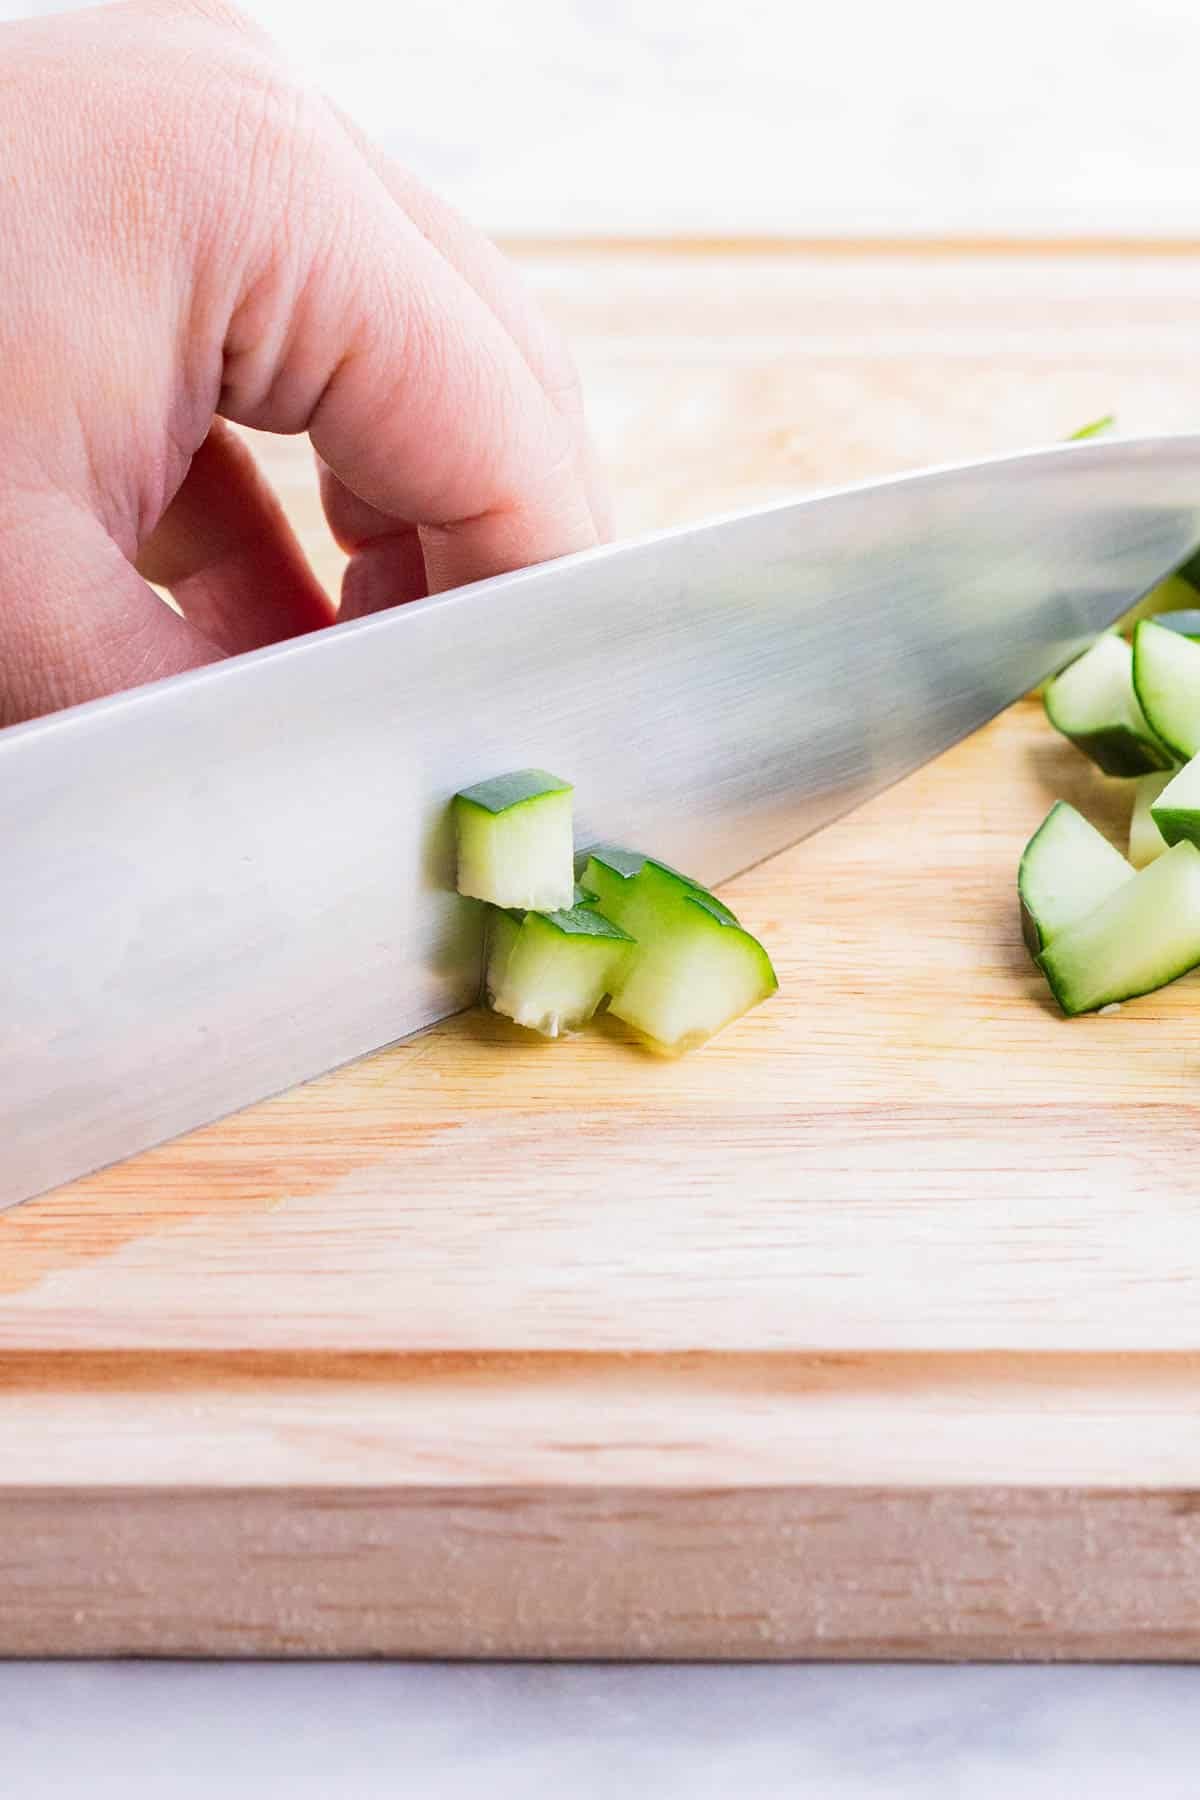 Cucumber planks are diced into pieces.